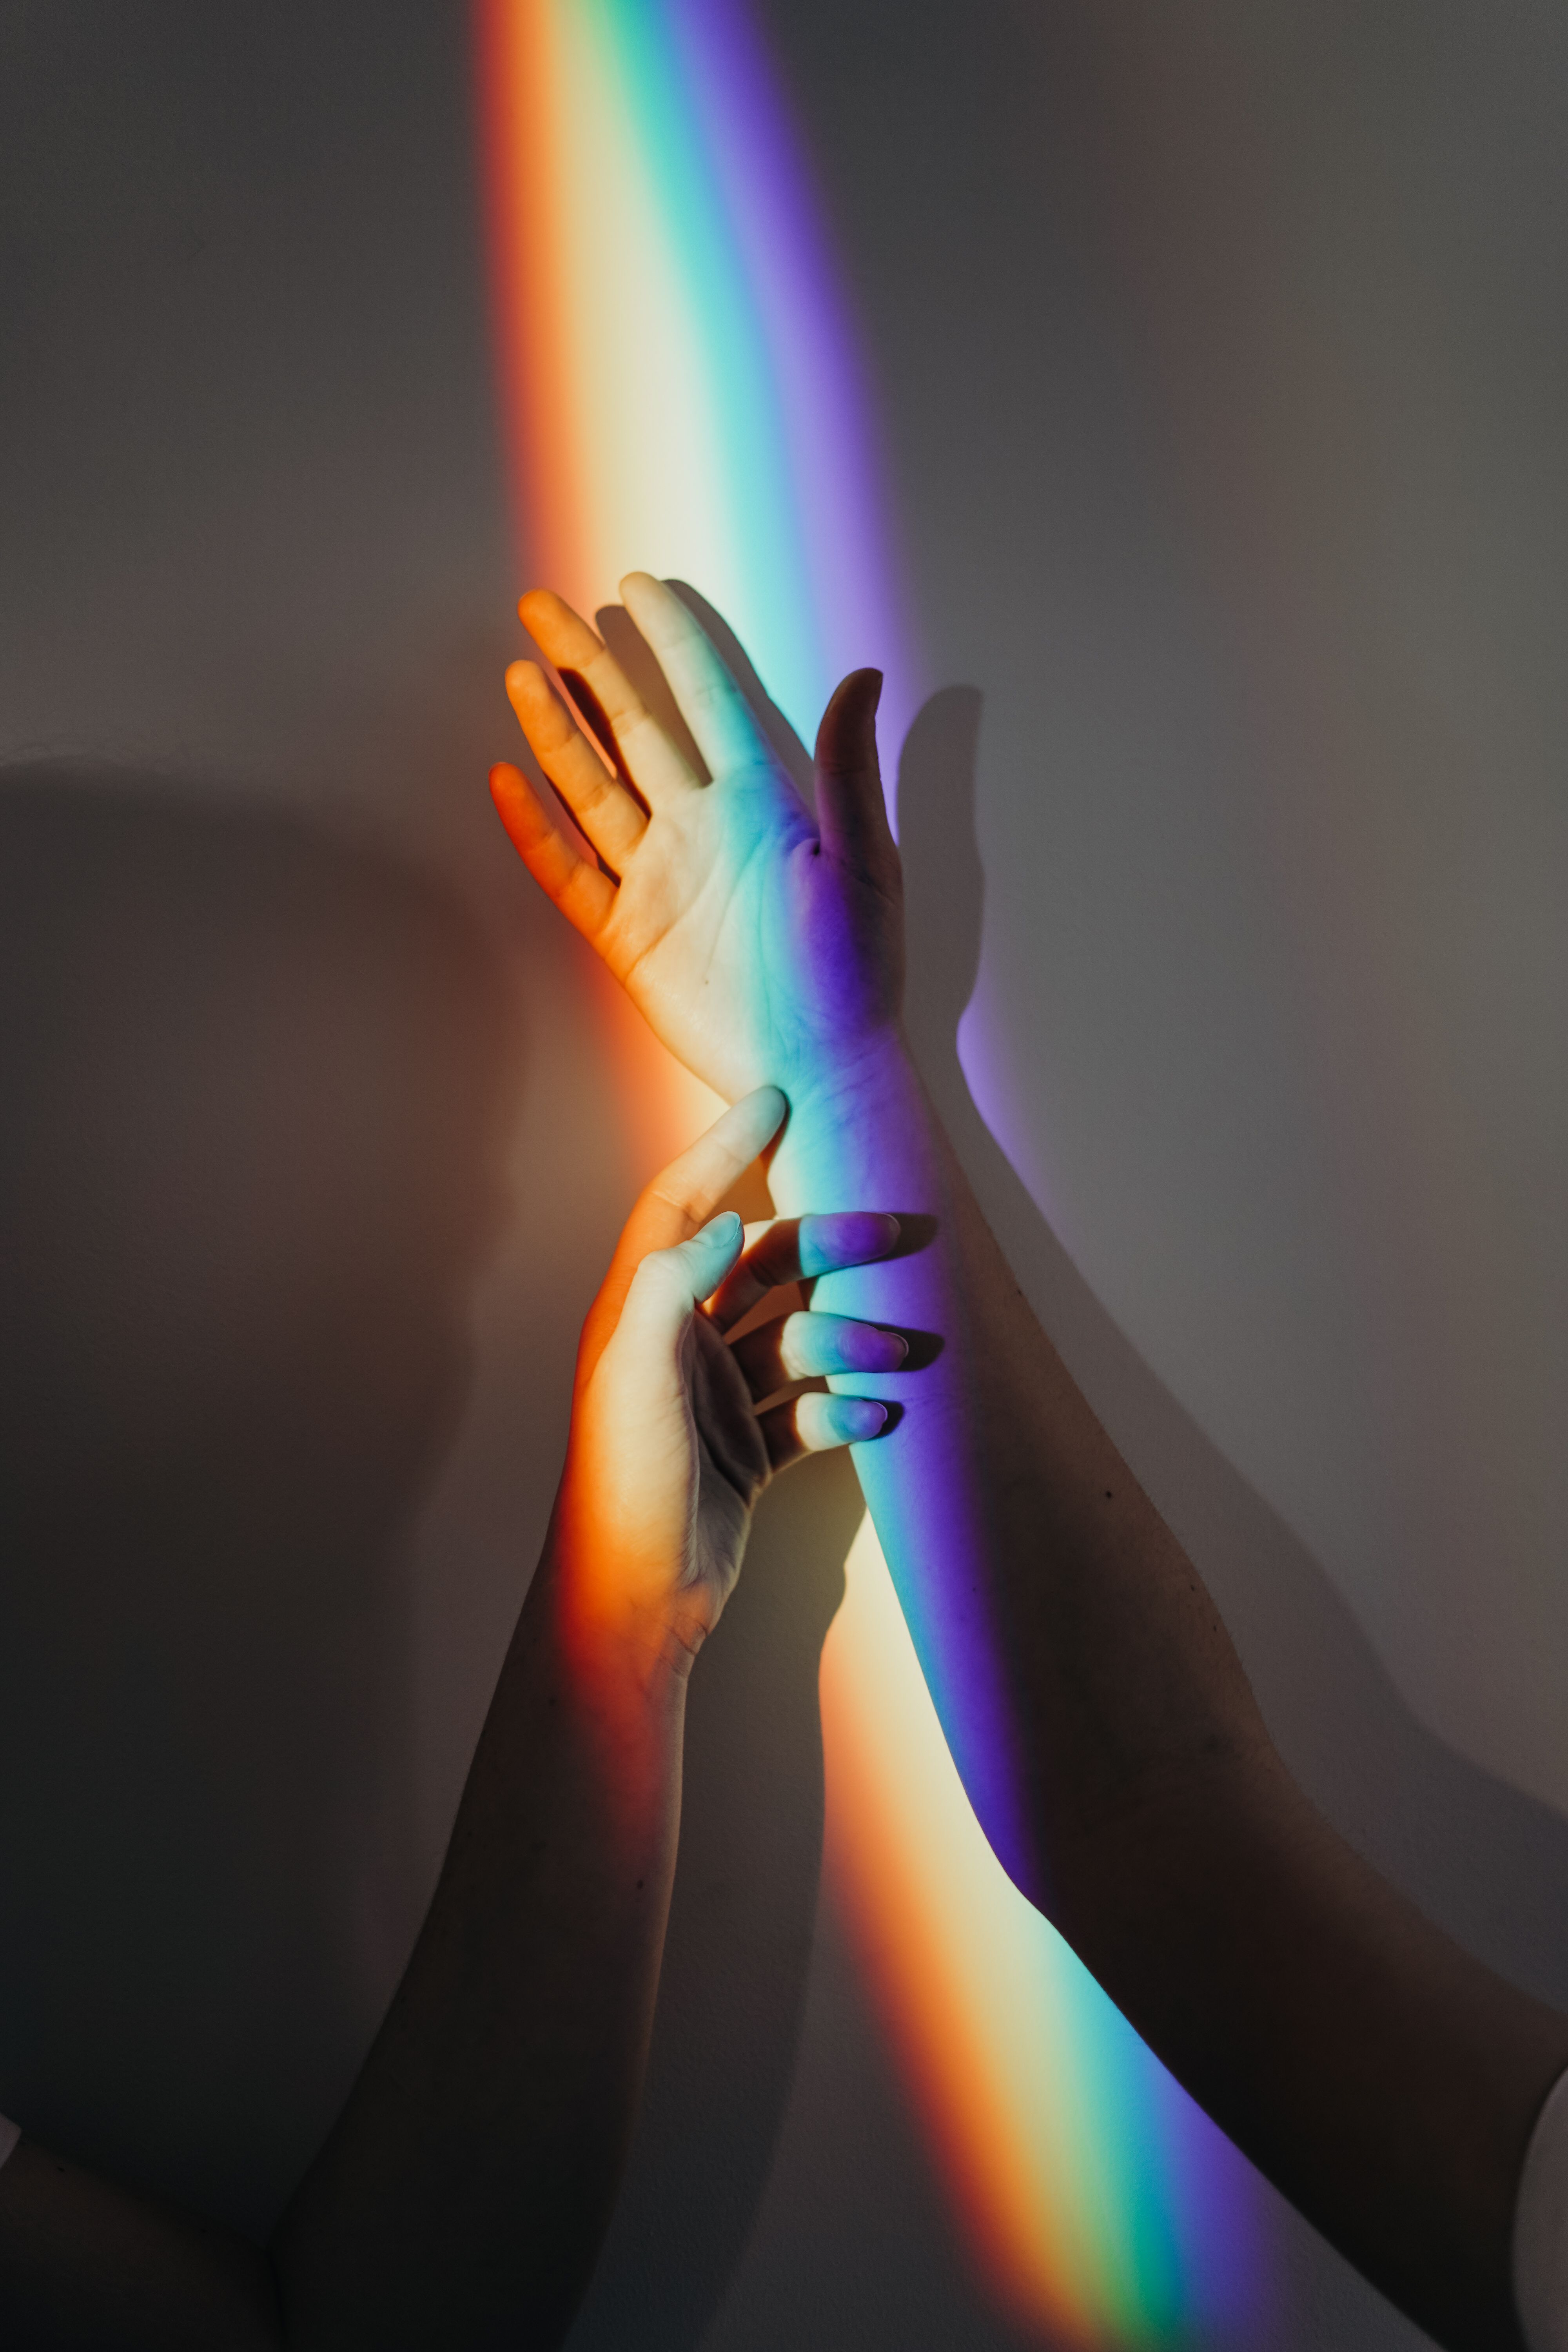 Persons Hands With Rainbow Colors · Free